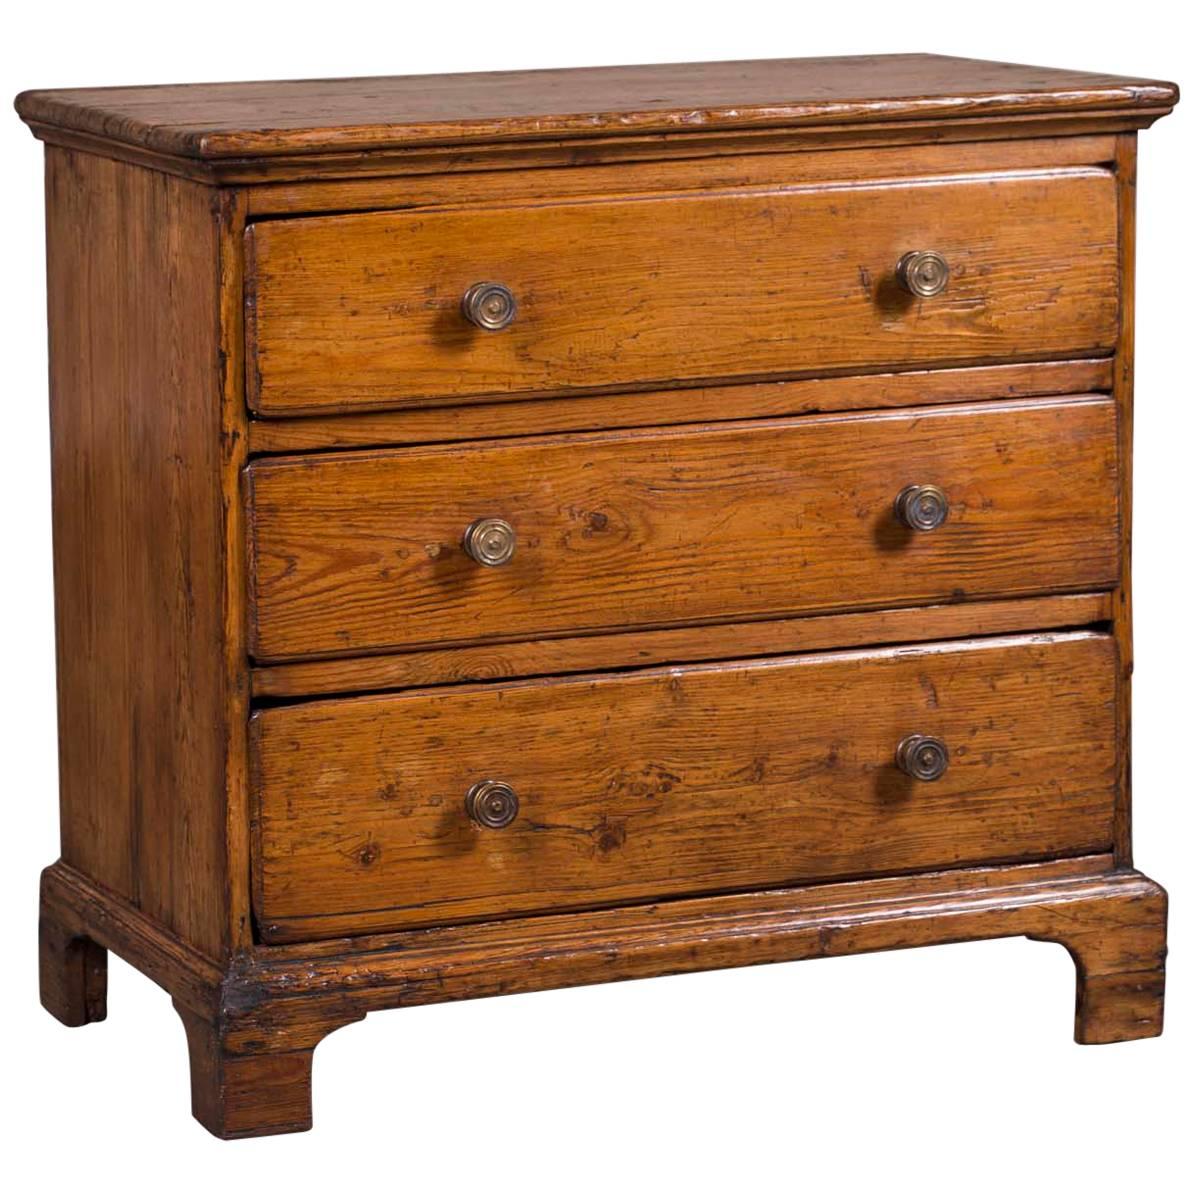 Antique English George III Period Pine Chest of Drawers, England, circa 1770